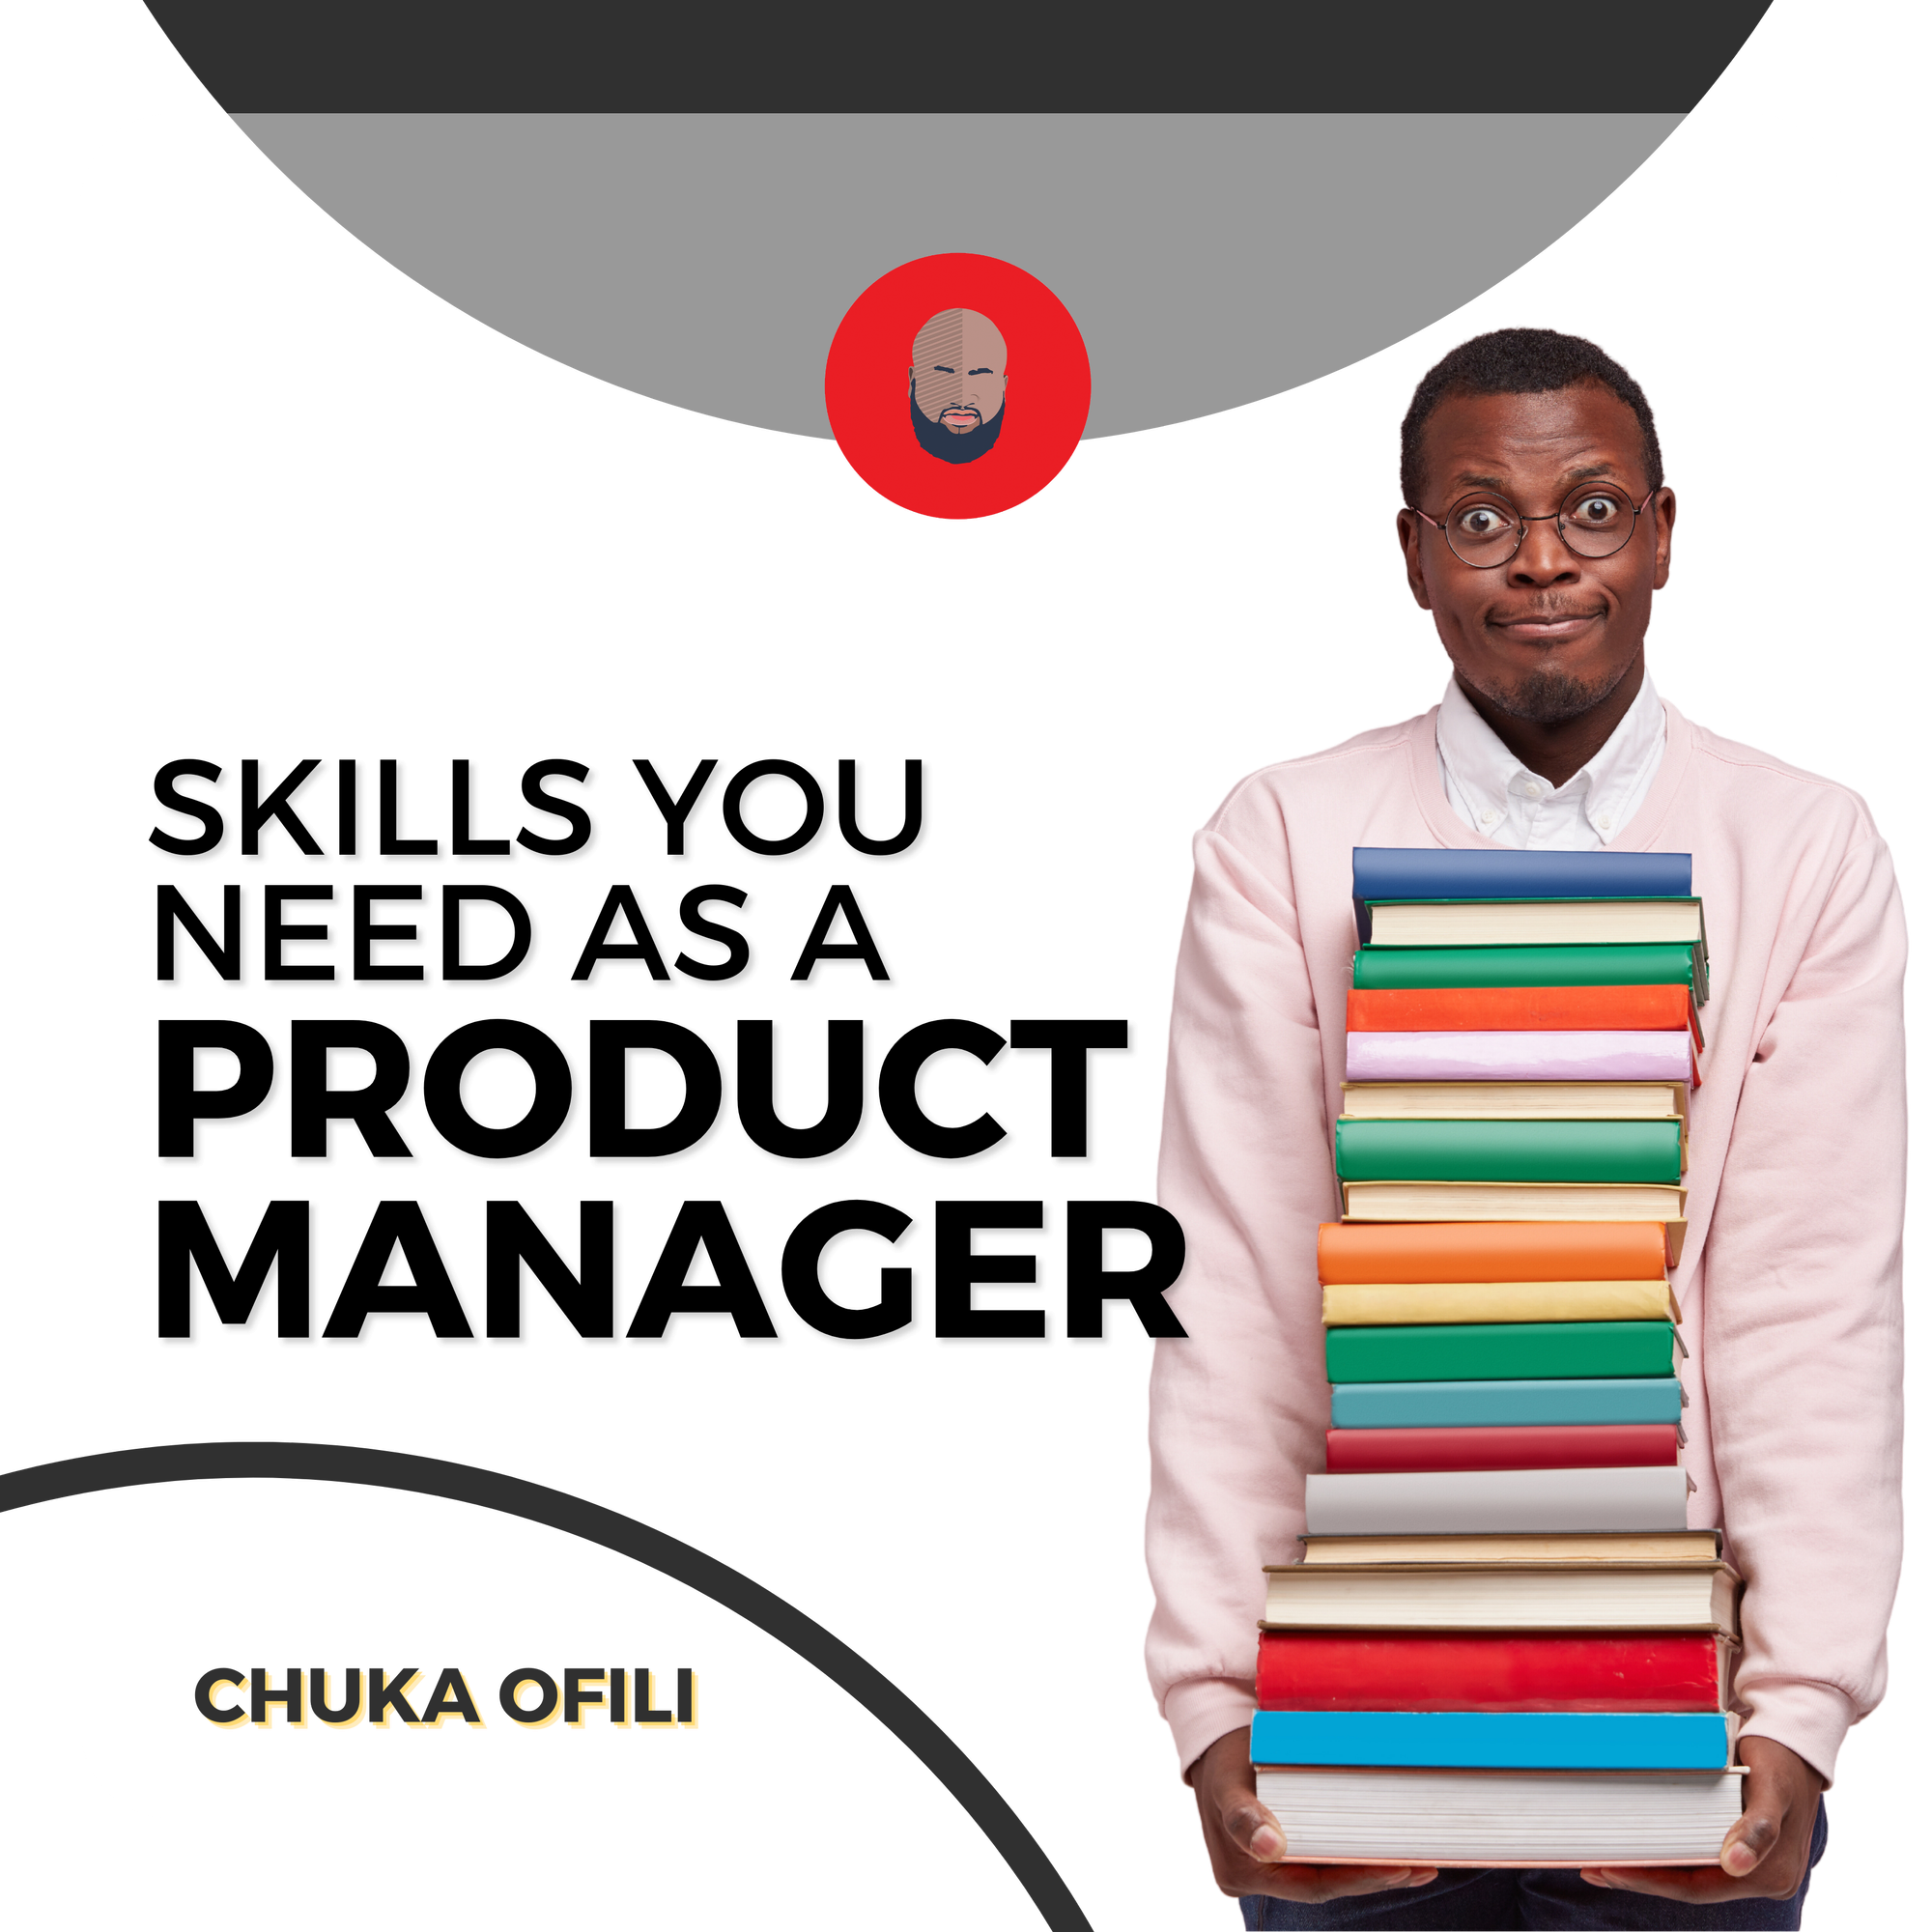 Skills you need as a Product Manager